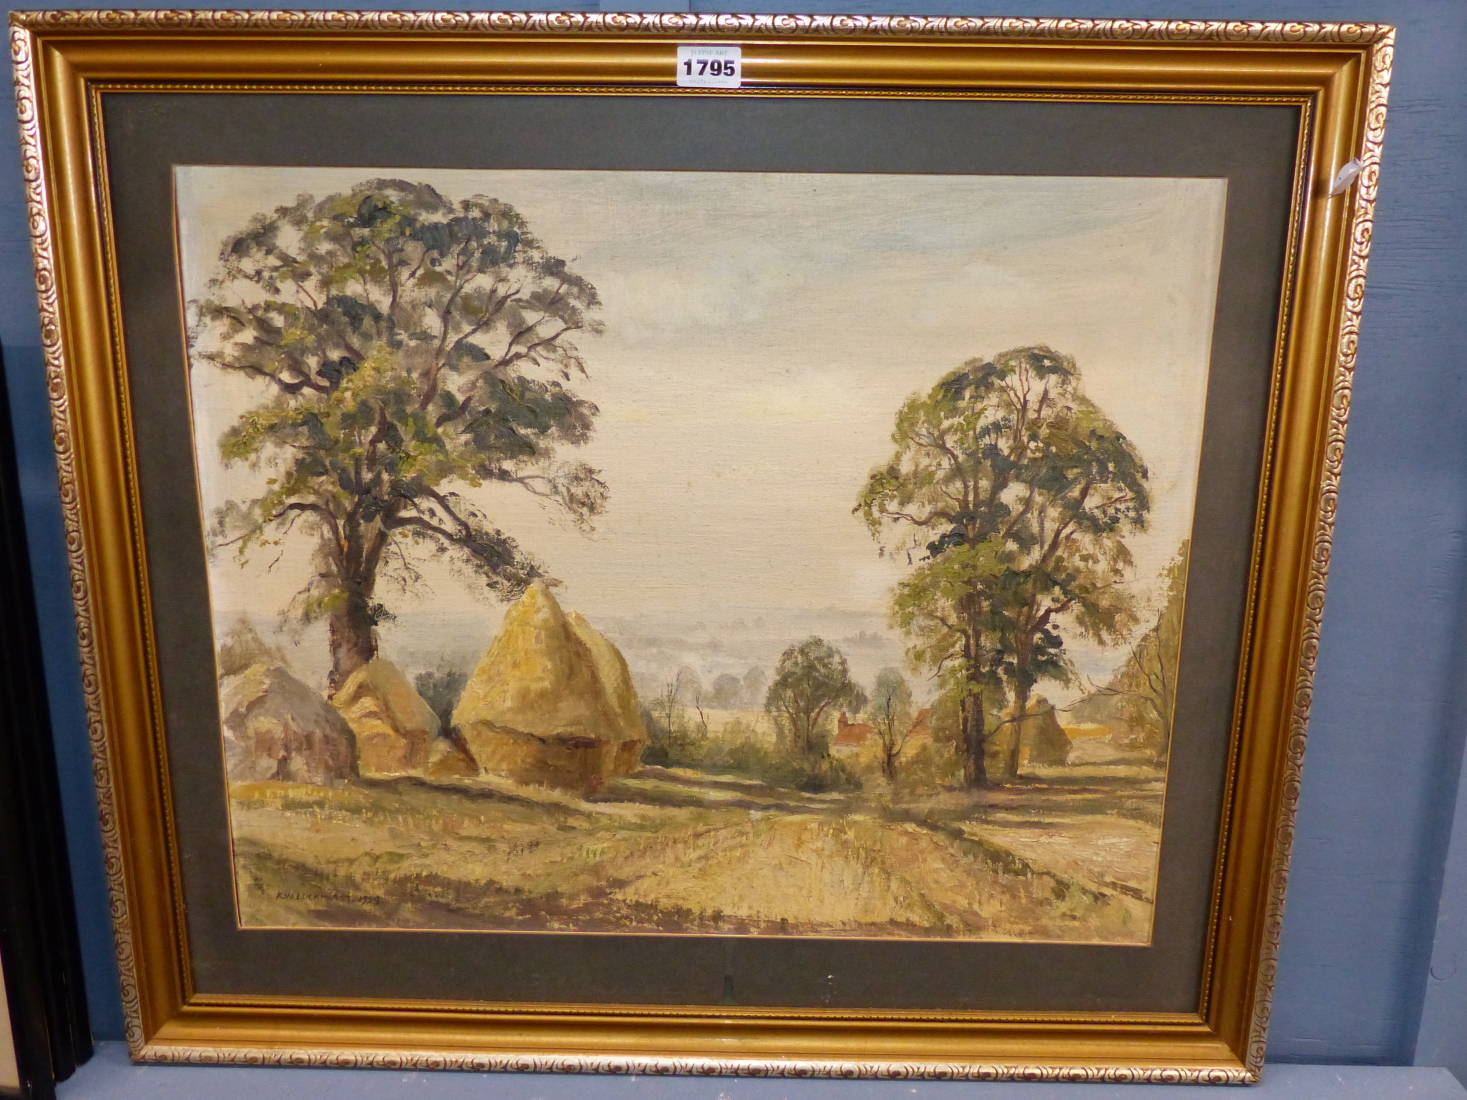 R.W. LUCKHURST (20TH CENTURY), HAYSTACKS AND ELM TREES IN AN EXTENSIVE LANDSCAPE, SIGNED AND DATED - Image 2 of 5